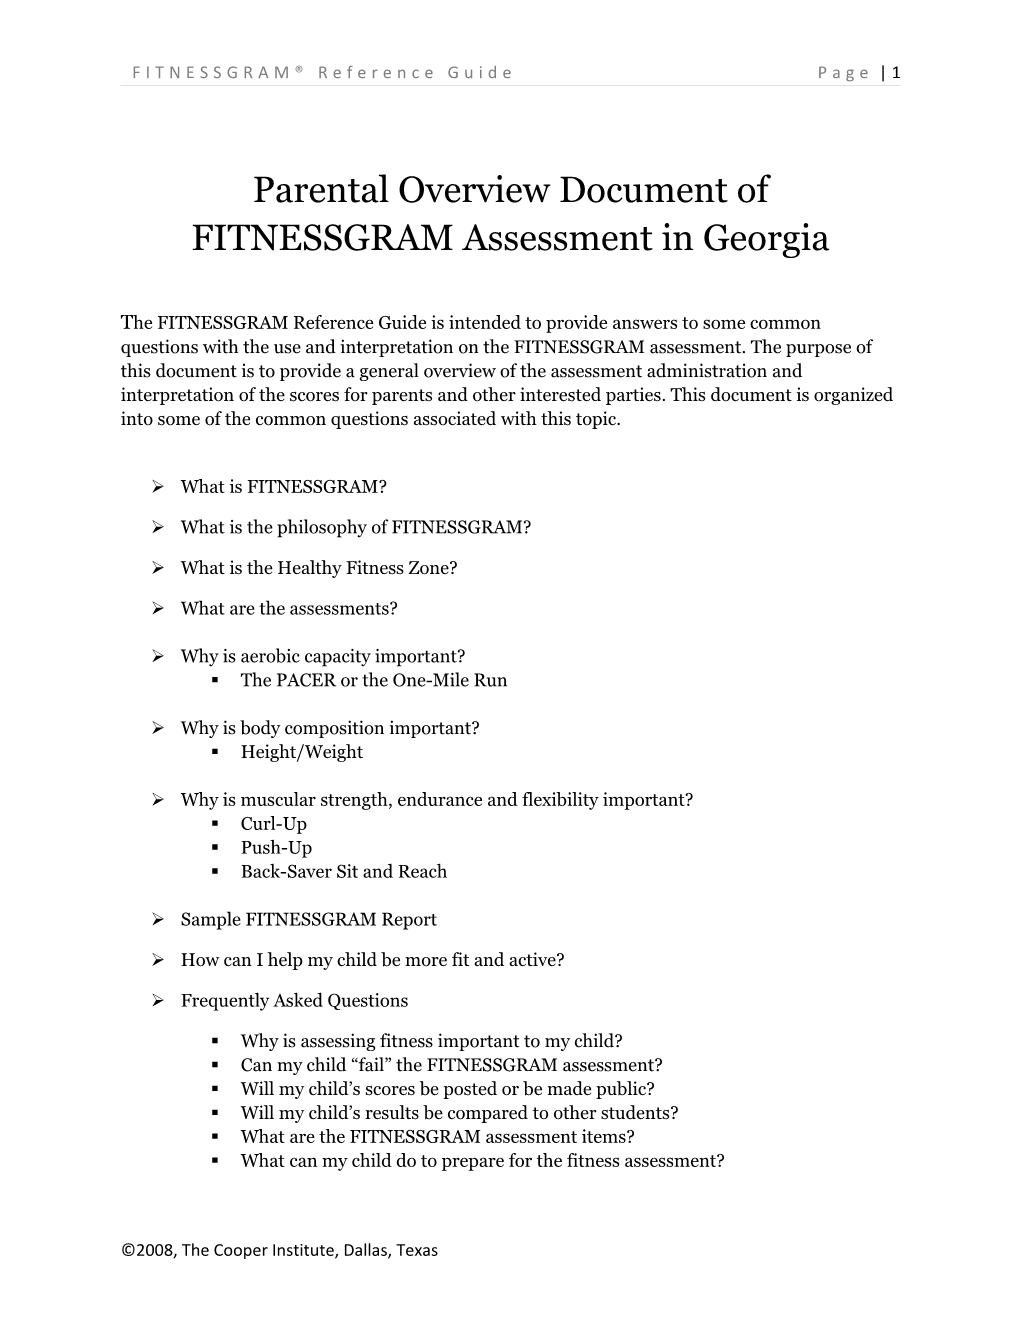 FITNESSGRAM Reference Guide Page 1